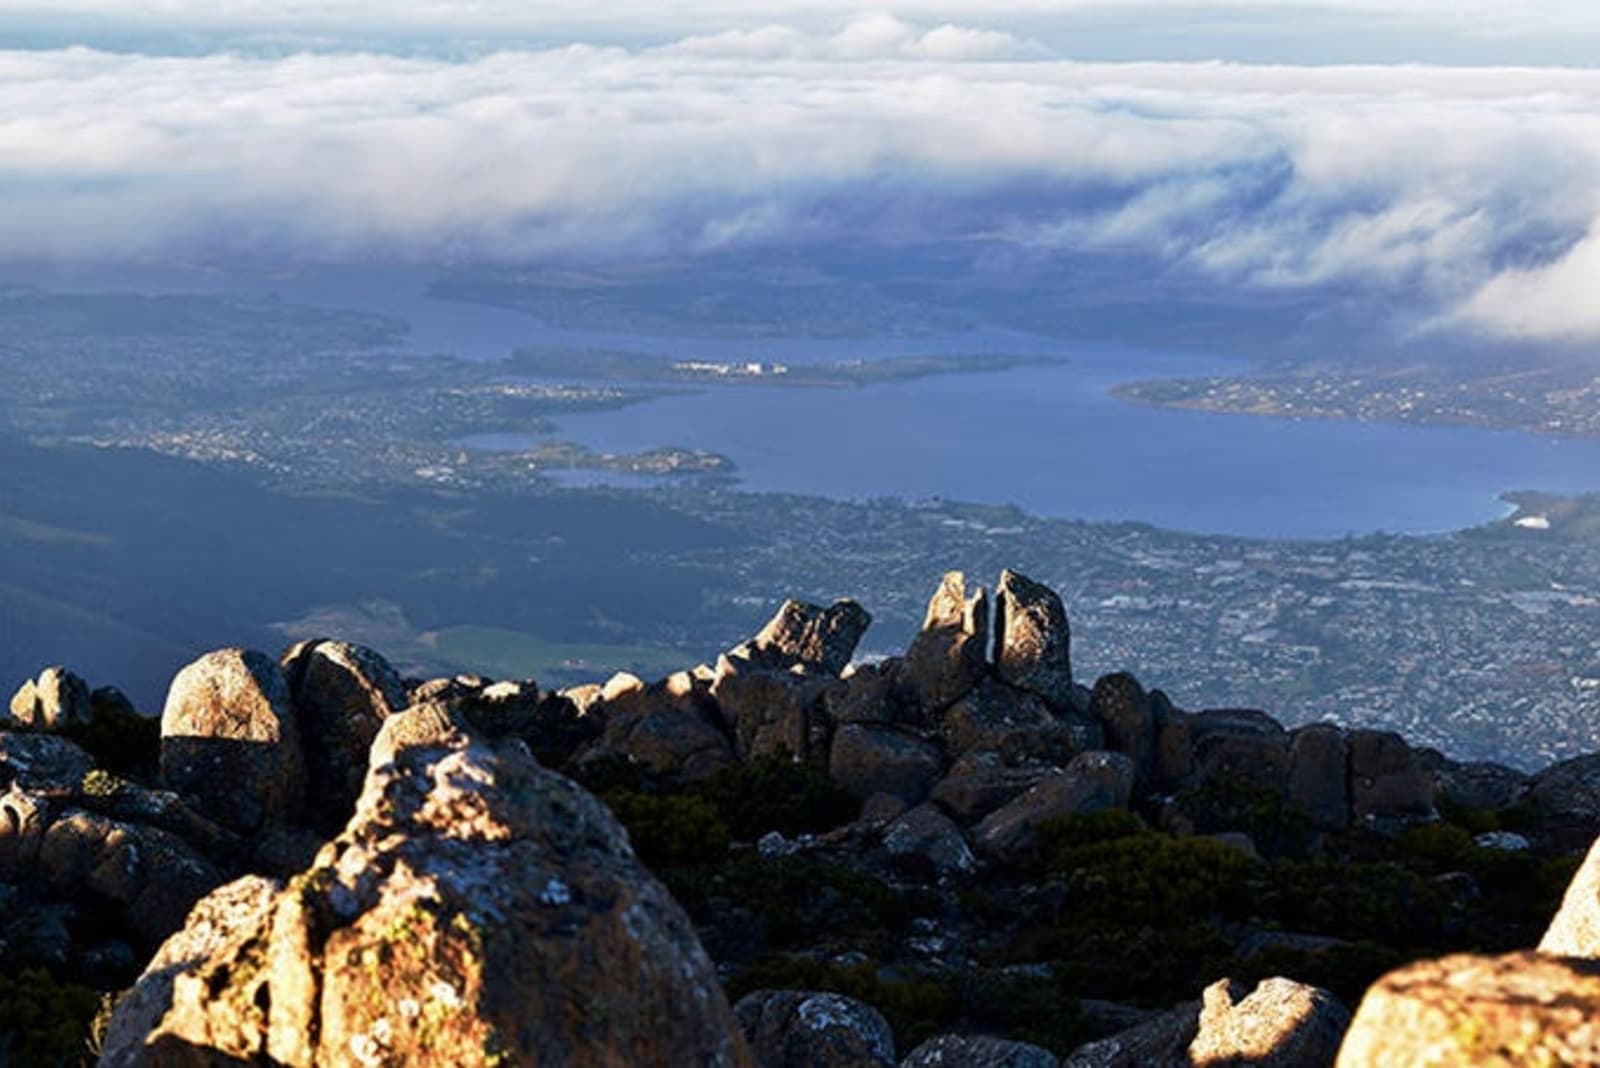 rs-hayley-lewis-alovelyplanet-views-from-mount-wellington-1.jpeg